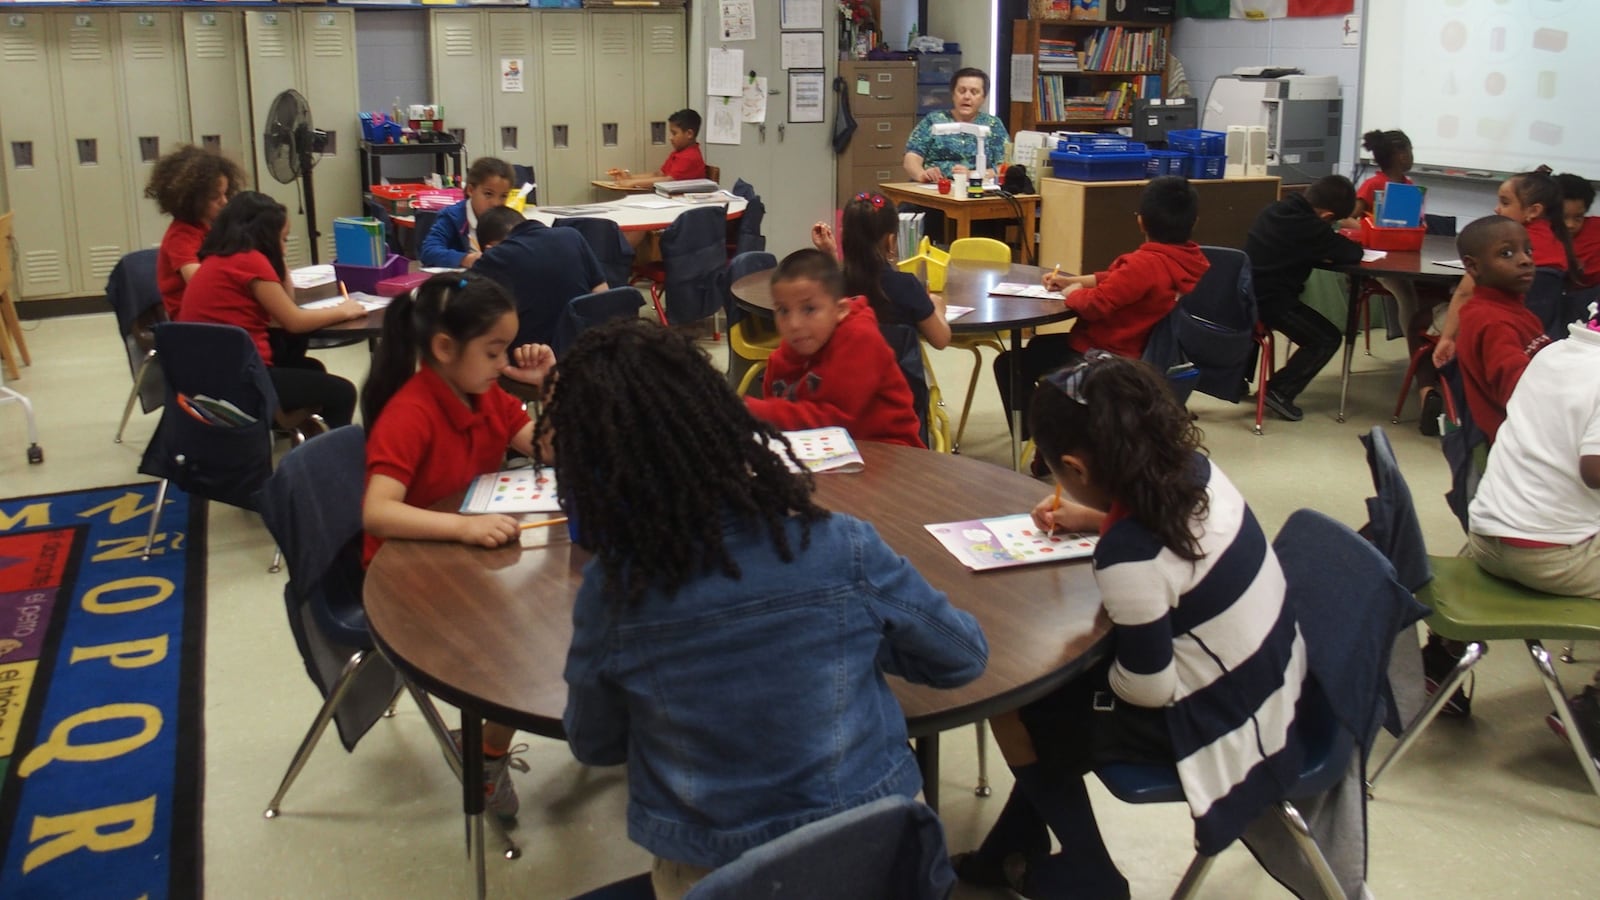 Teacher LeiRene Perez works with third-grade students in Spanish at Treadwell Elementary School in Memphis.